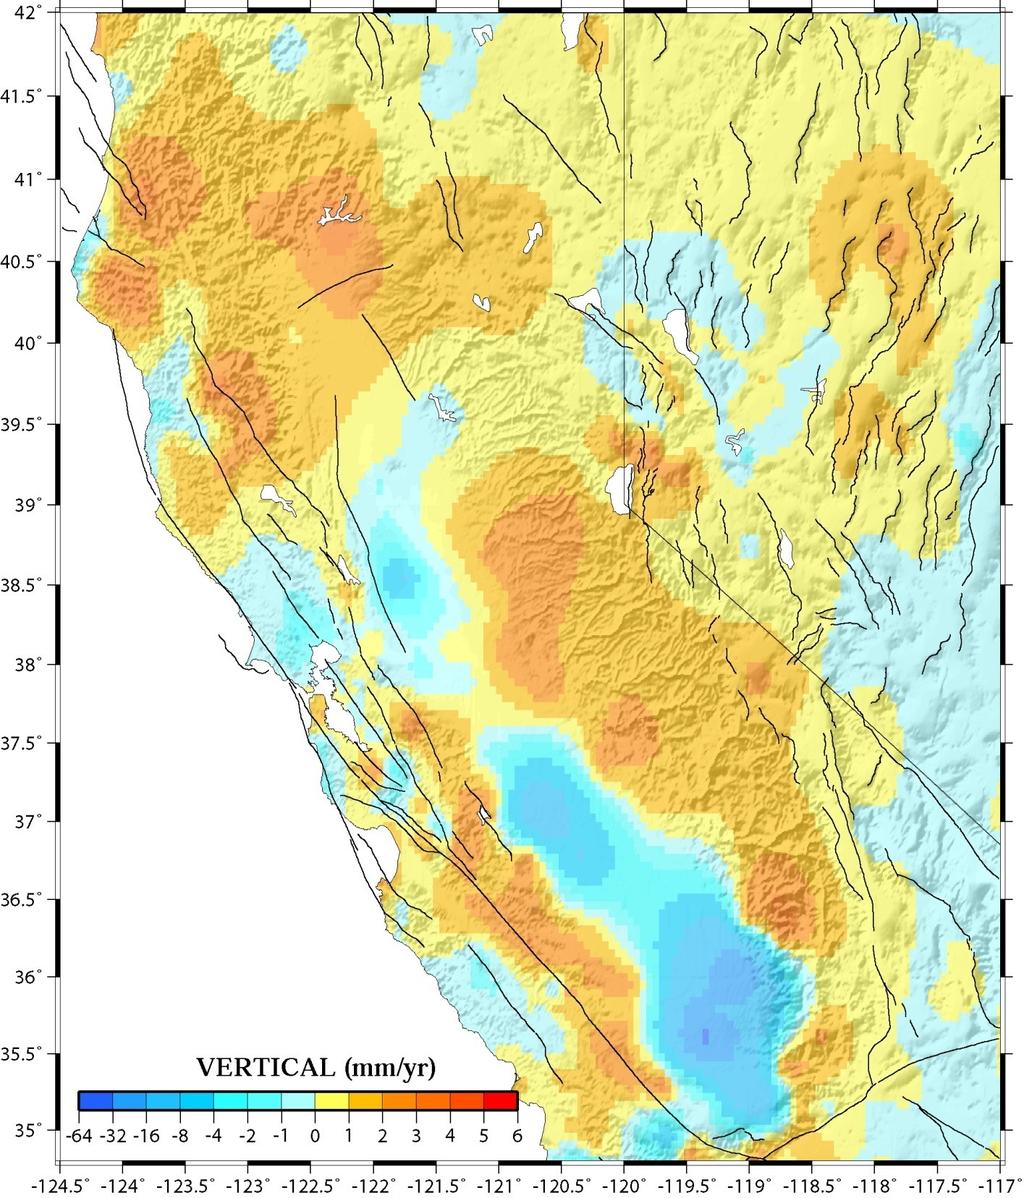 GPS Vertical Velocity Map Great Valley Huge subsidence Bad stations included Hydrological effects Areas of Uplift